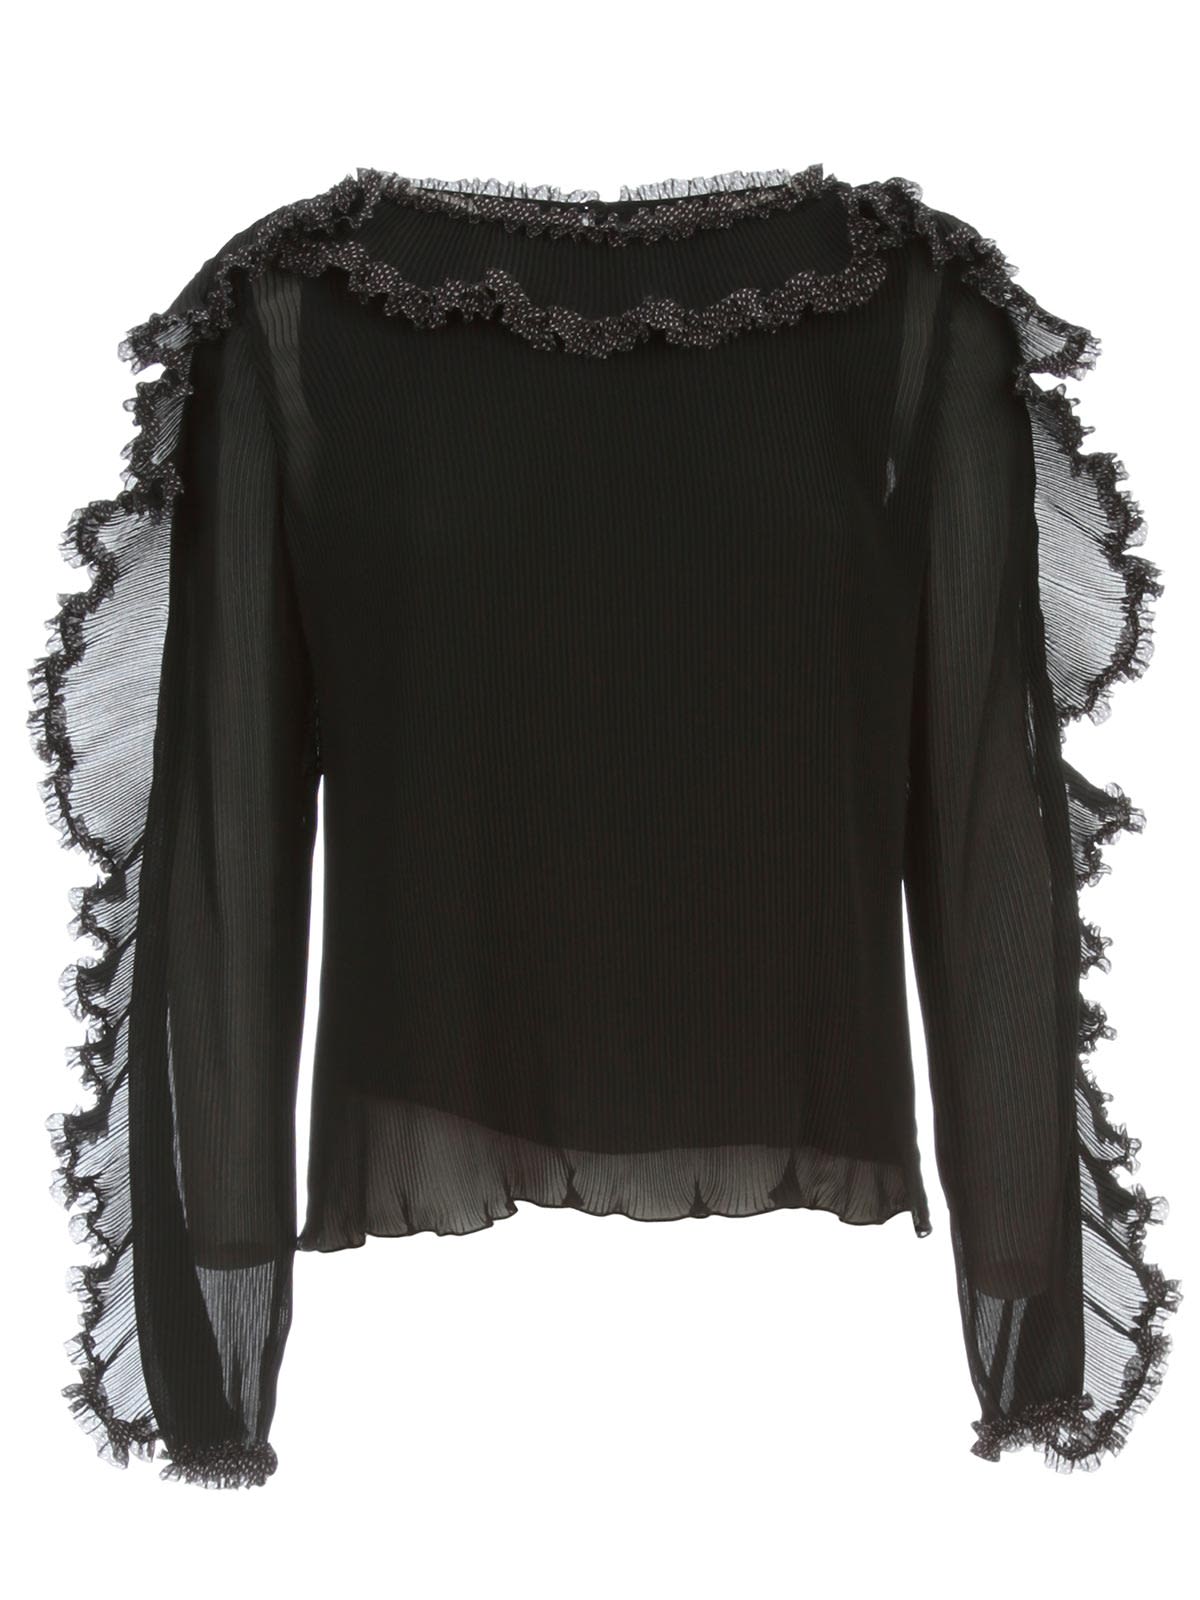 SEE BY CHLOÉ SWEATER L/S WIDE NECK W/FLOUNCE,11209524